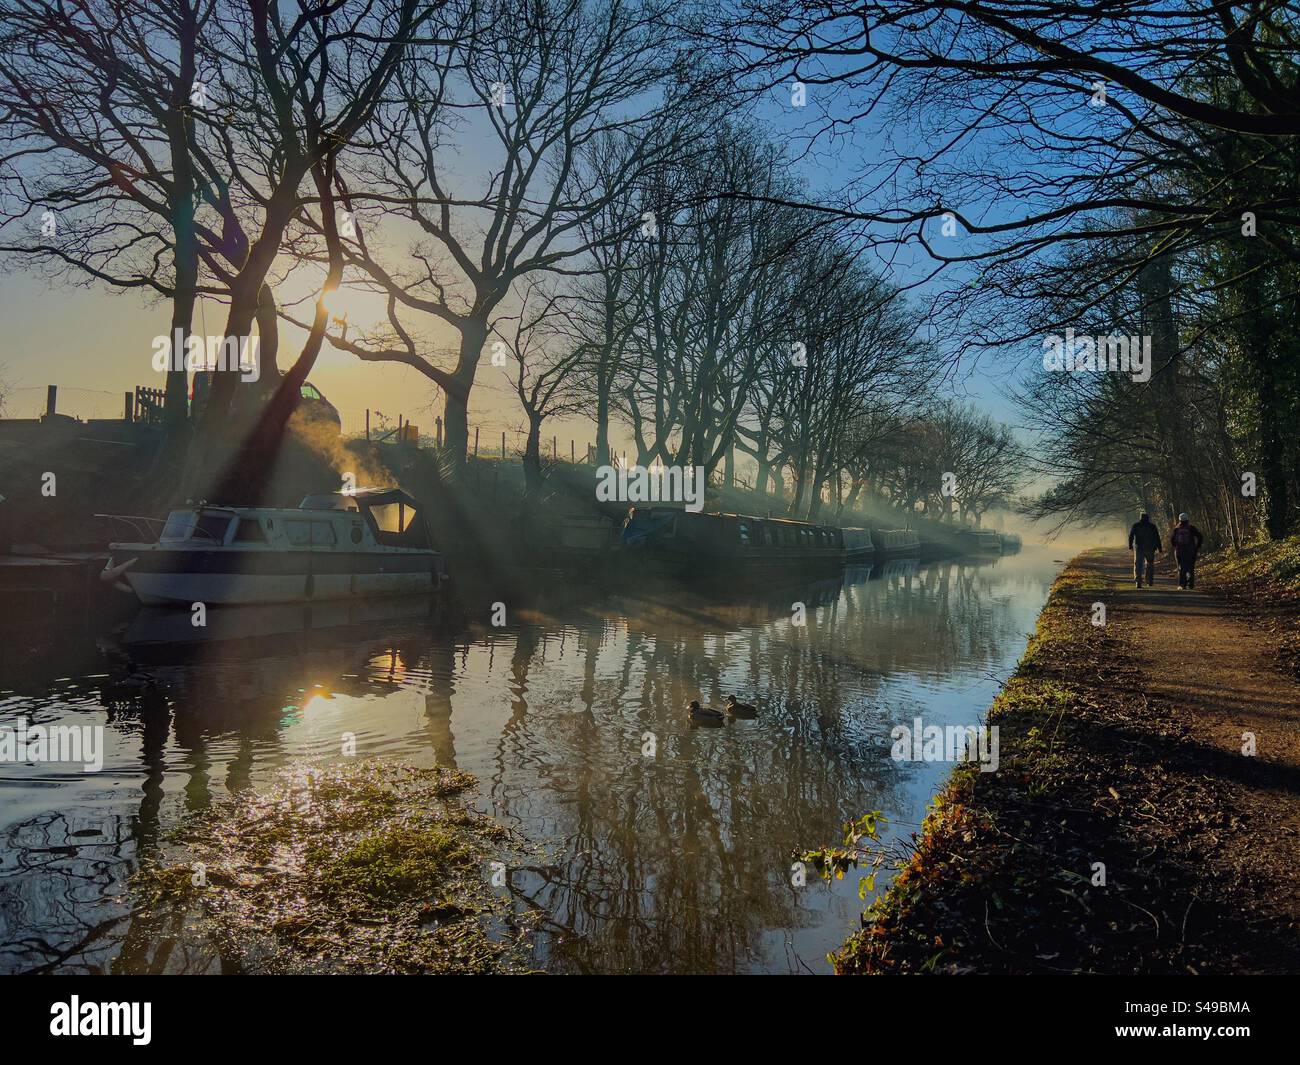 Reflections in winter morning mist on Leeds and Liverpool canal at Adlington, Lancashire. Two people walking on tow path with reflections of trees and narrow boats in canal. Stock Photo